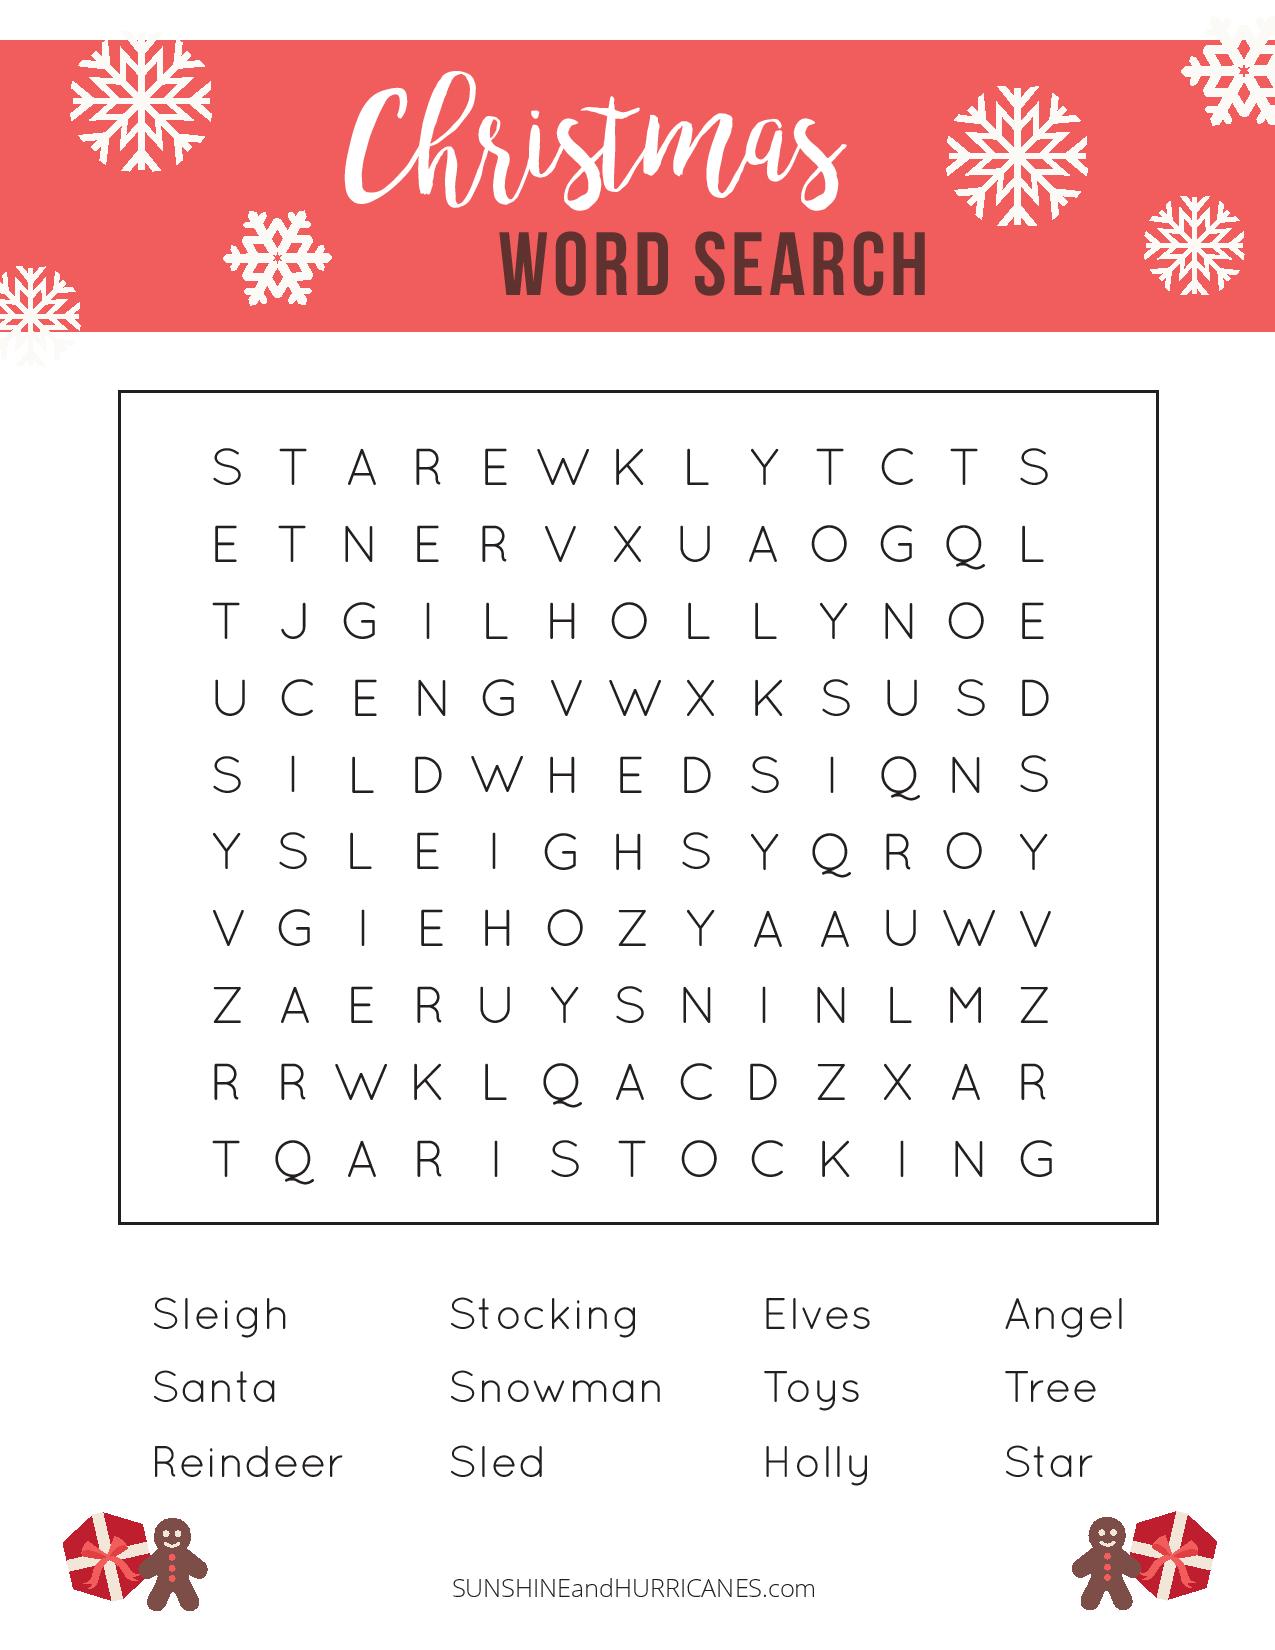 printable-word-searches-for-kids-activity-shelter-5-fun-christmas-word-search-printable-for